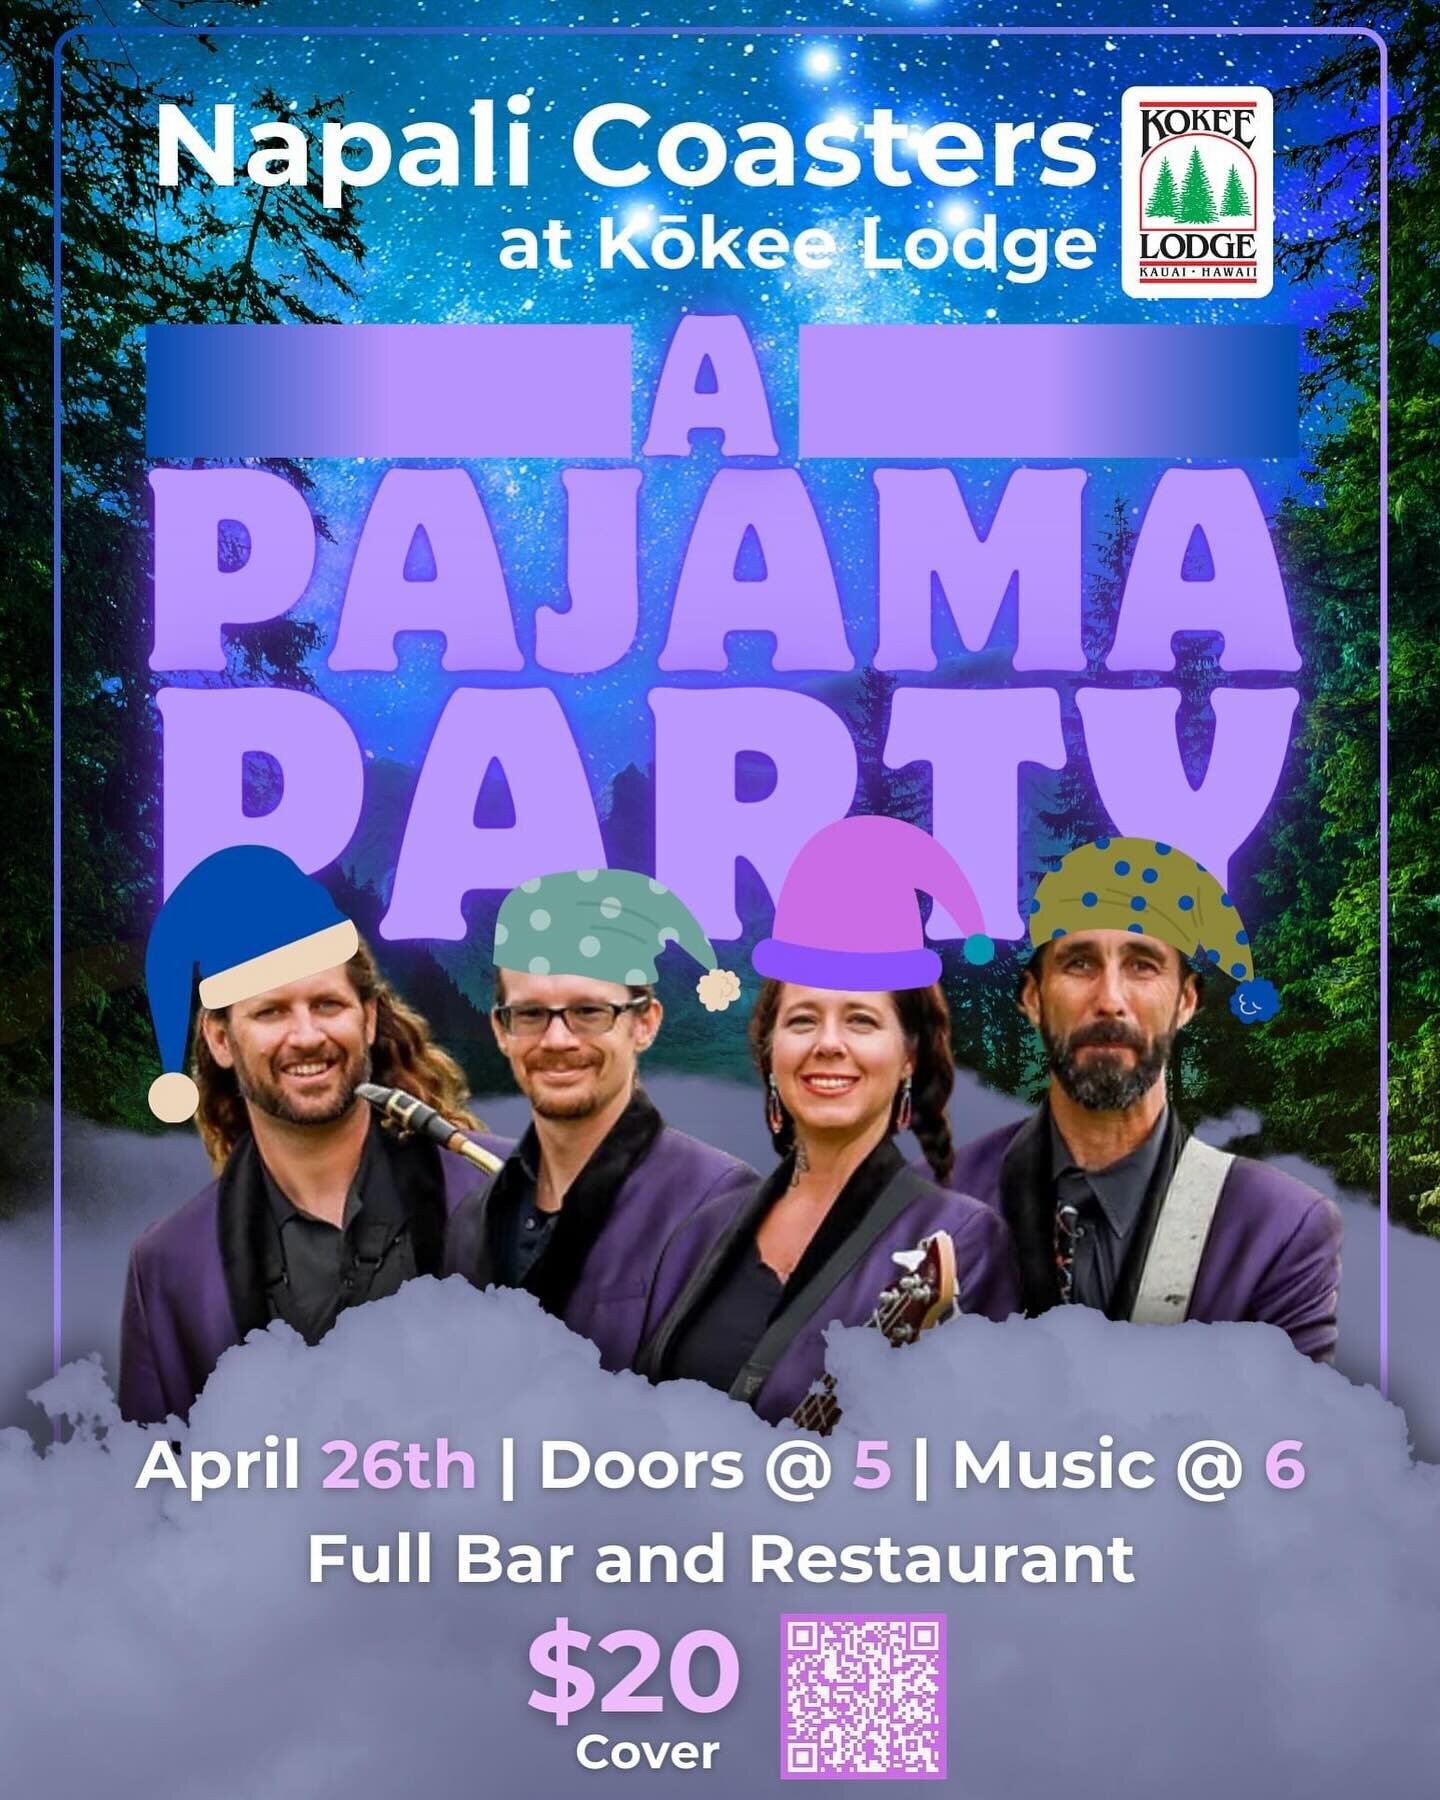 ✨Napali Coasters return to the Kōkeʻe Lodge✨

Join us in a pair of your coziest PJs for an evening in the meadow with music by Kauai&rsquo;s Napali Coasters, delicious food, and a fully stocked bar! 🎶🍽️🍹

🎟️ Tickets in bio! 
📅 April 26th
🚪 Door